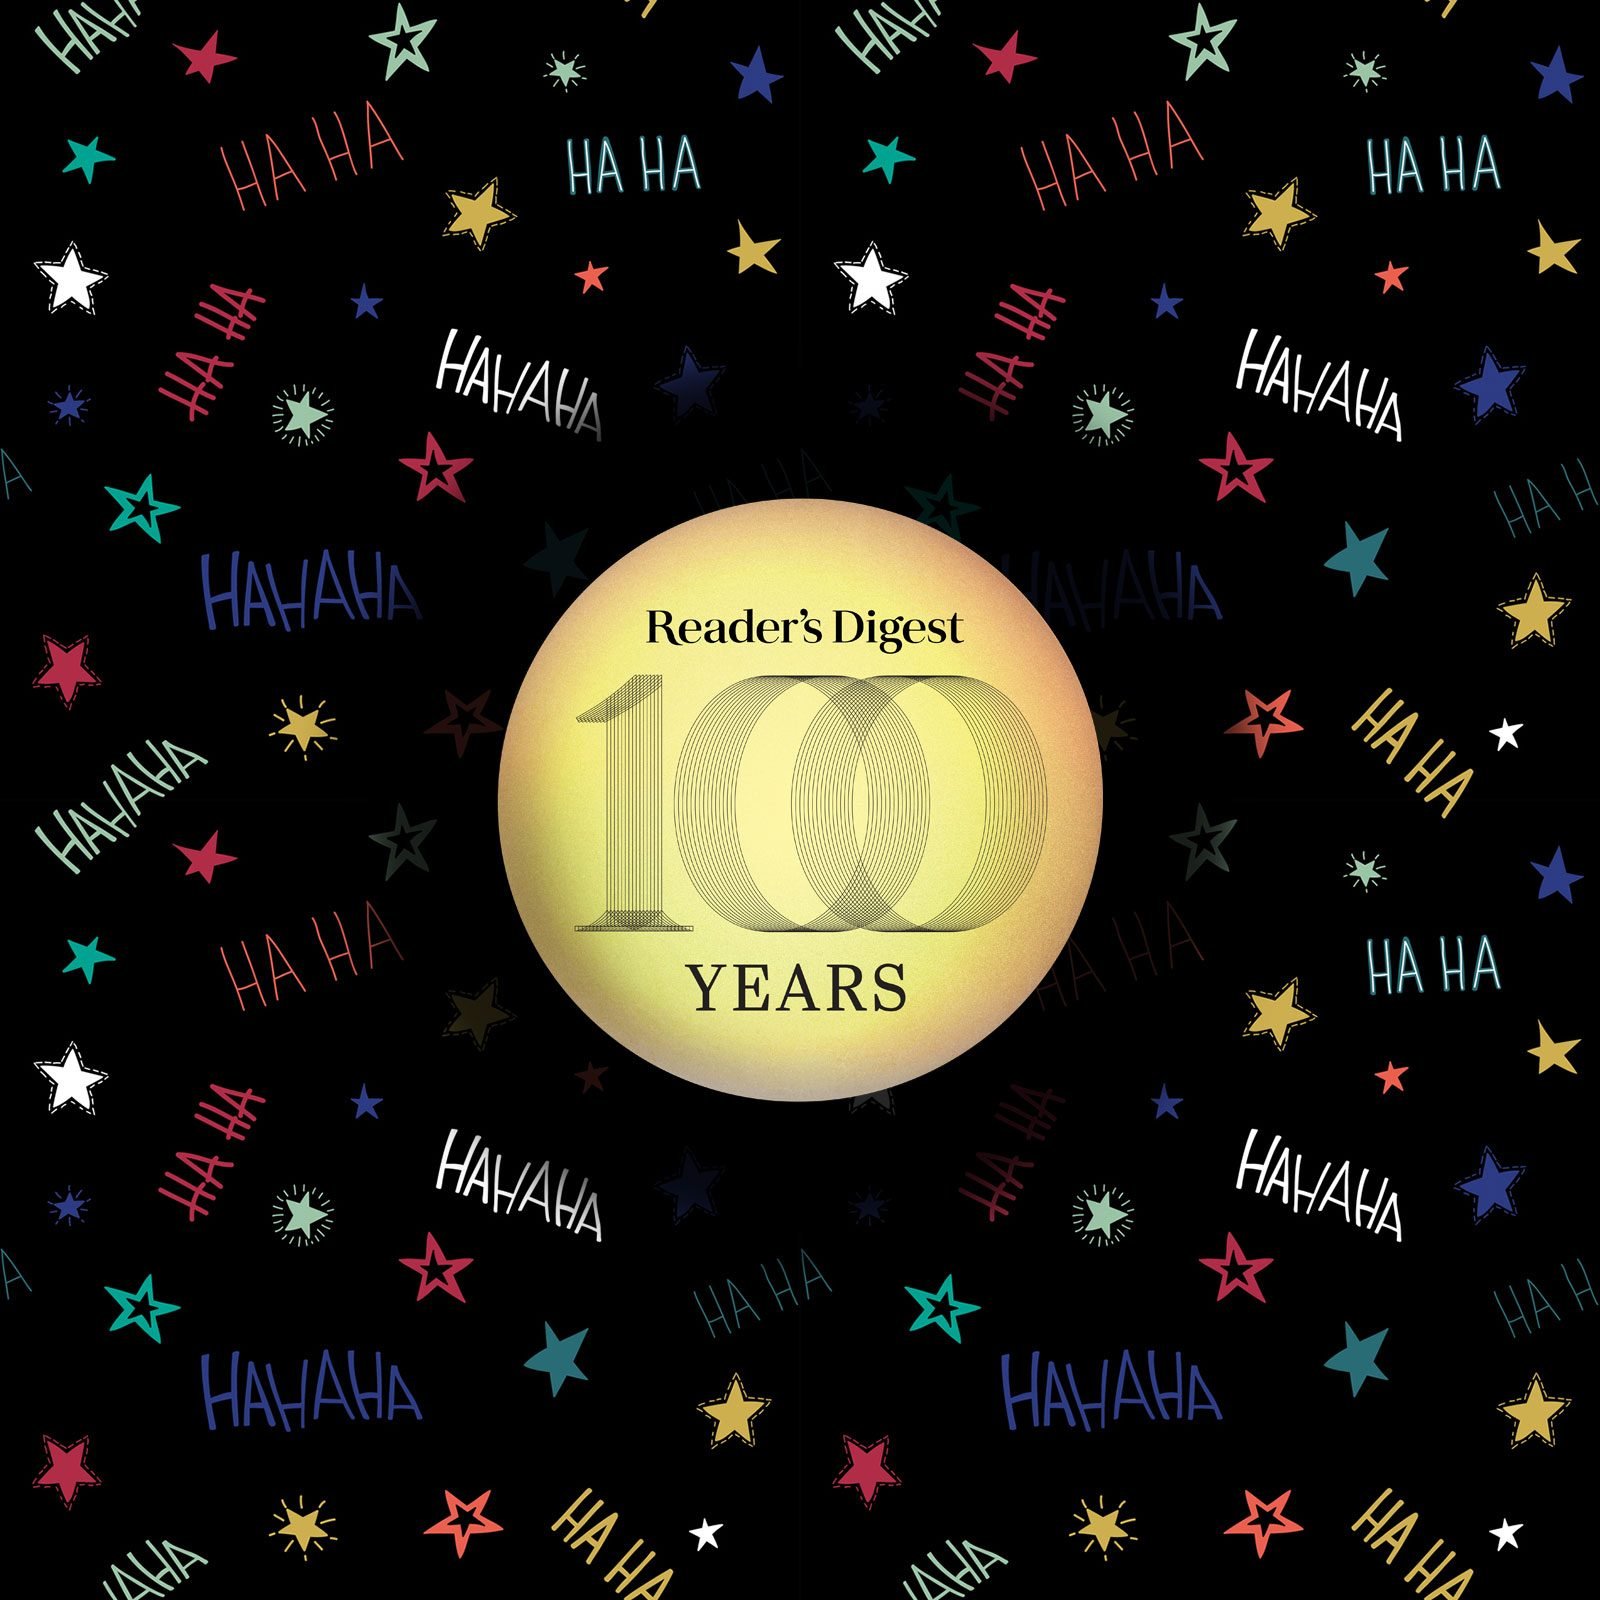 Reader's Digest 100 Years logo over a black background with doodles and "haha" creating a pattern